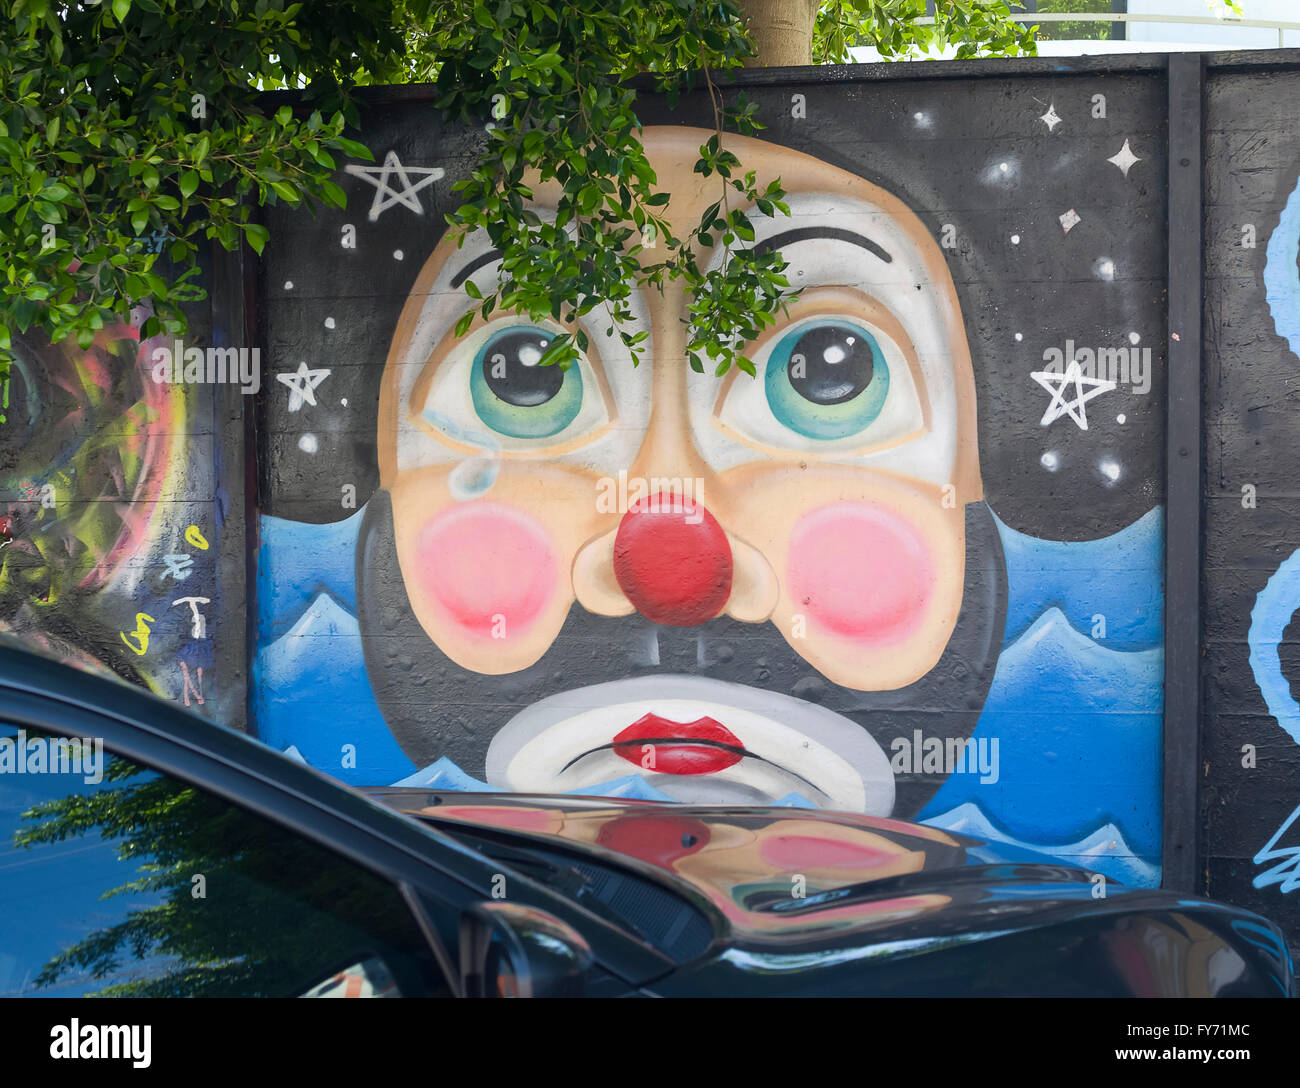 A colorful wall mural in a parking lot off of Melrose Ave. in Los Angeles, California depicts a colorful clown face Stock Photo